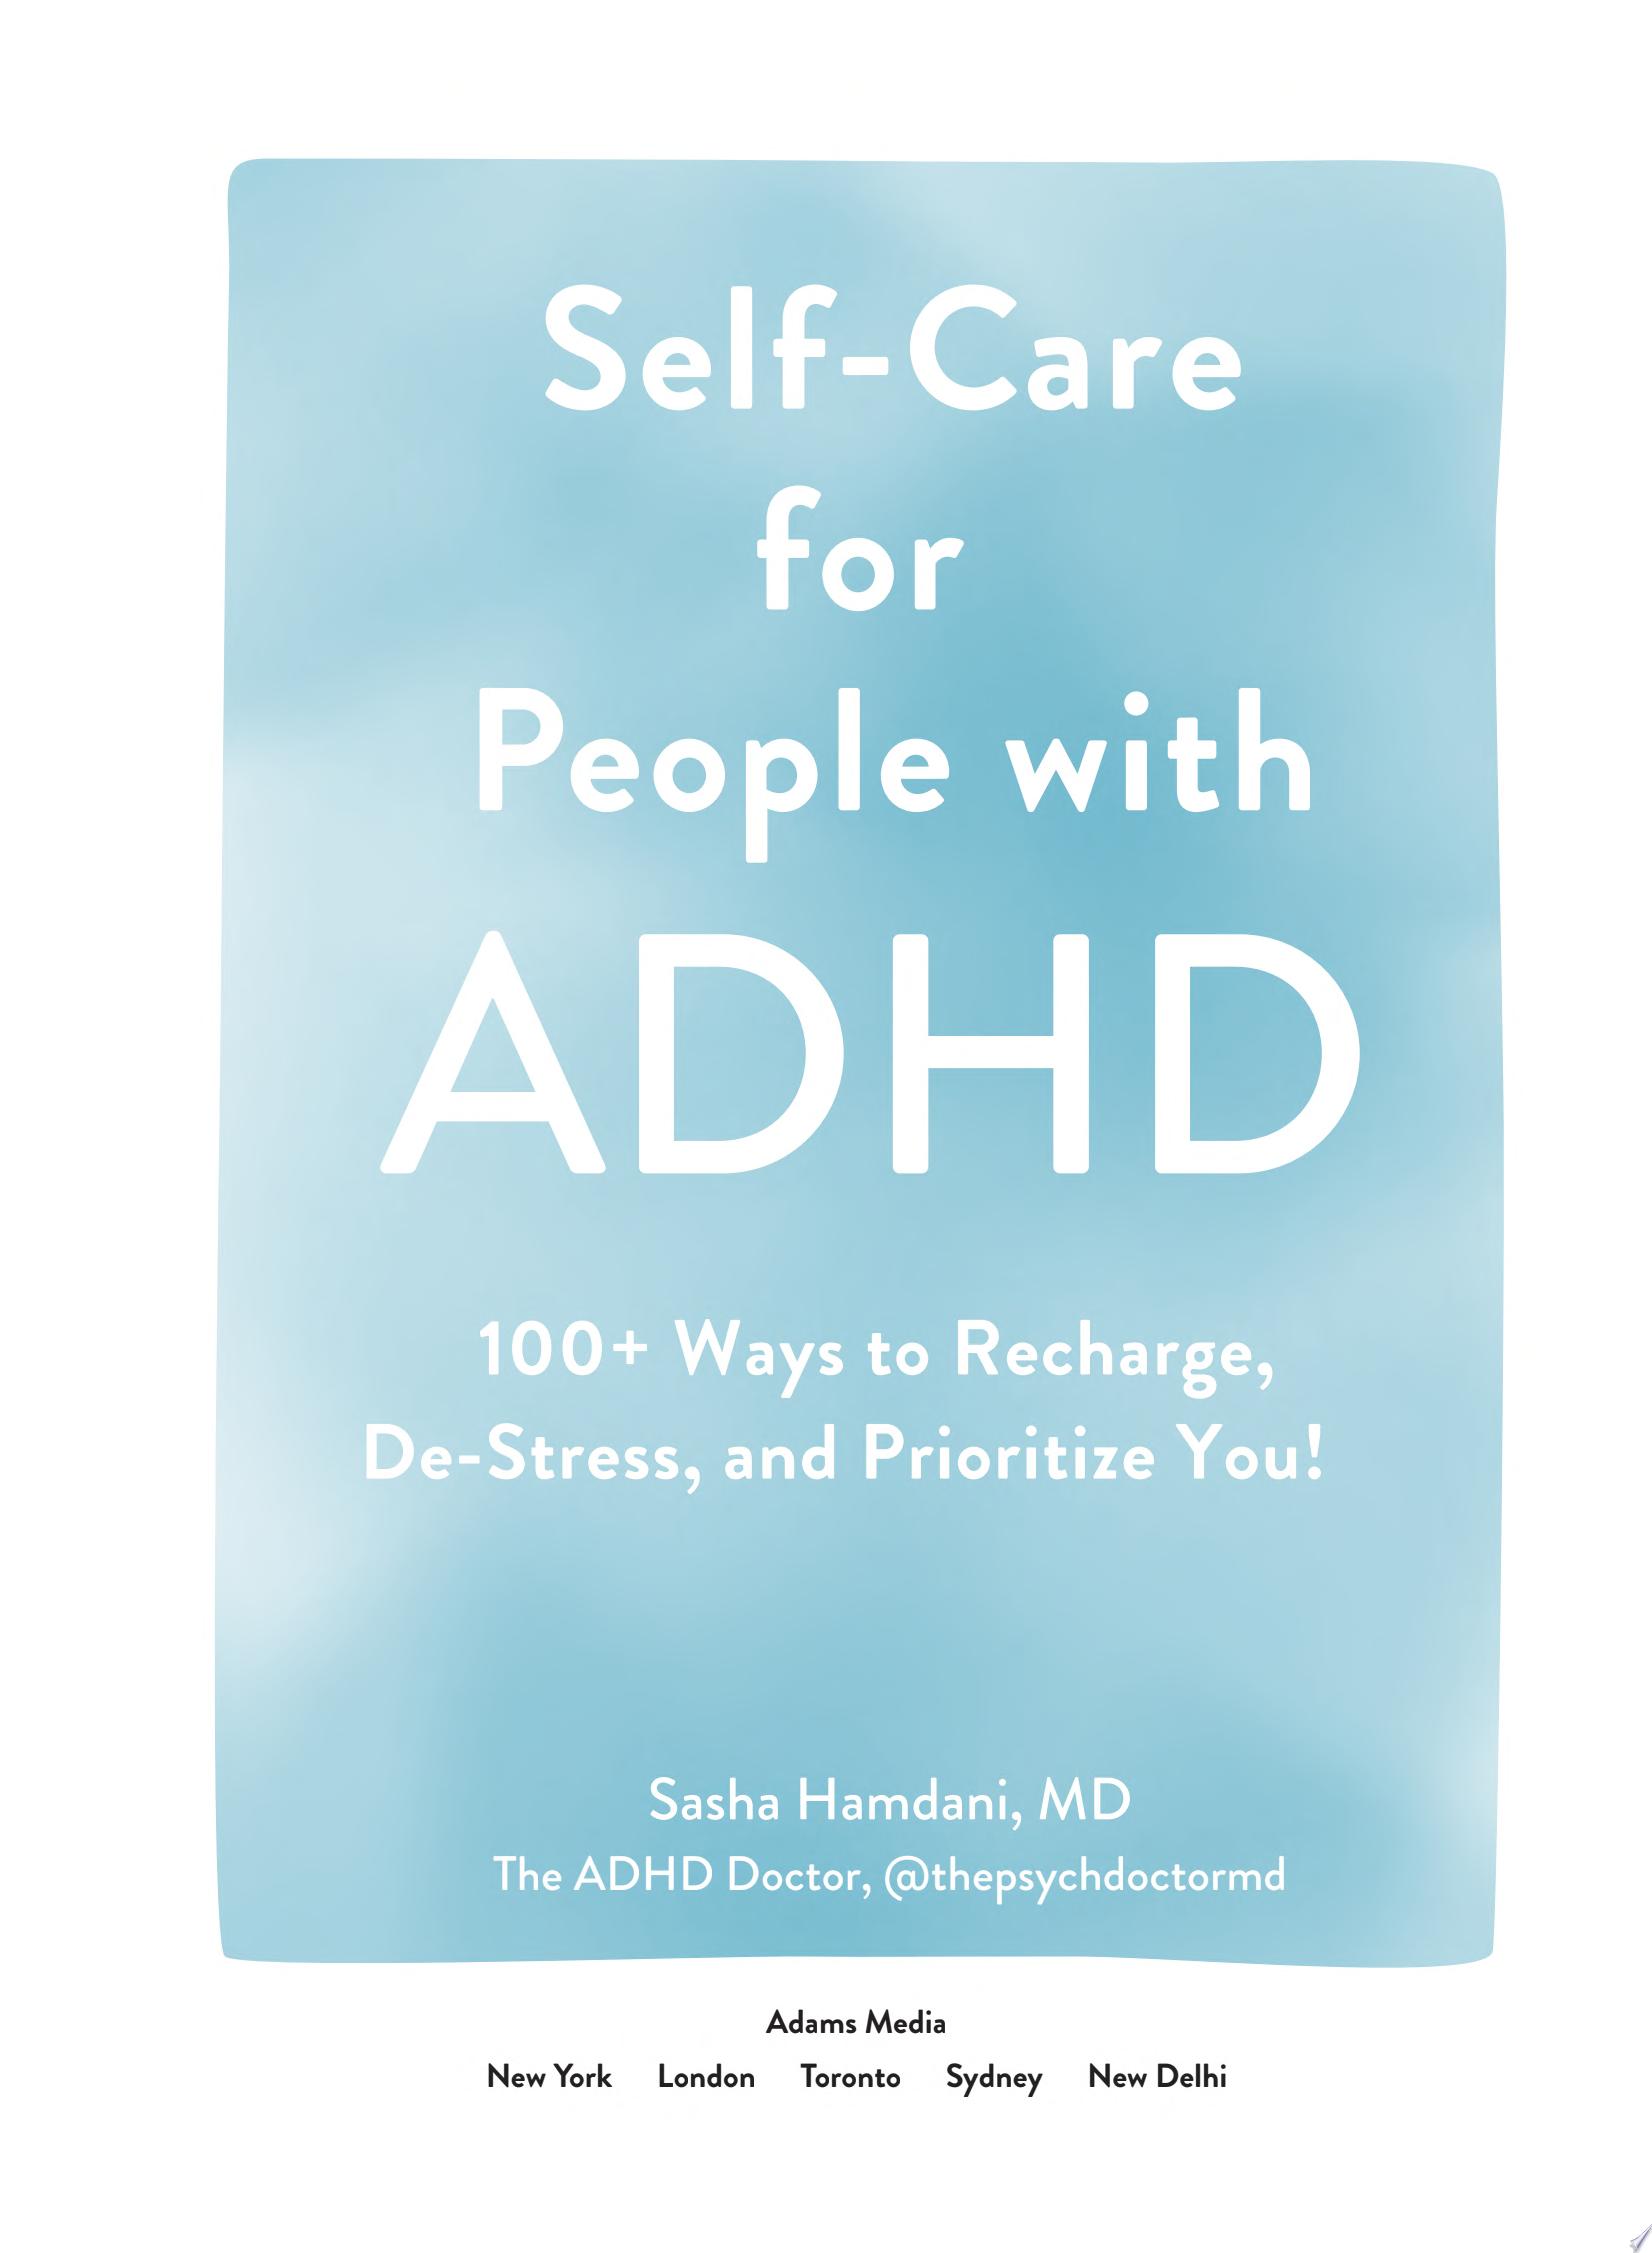 Image for "Self-Care for People with ADHD"